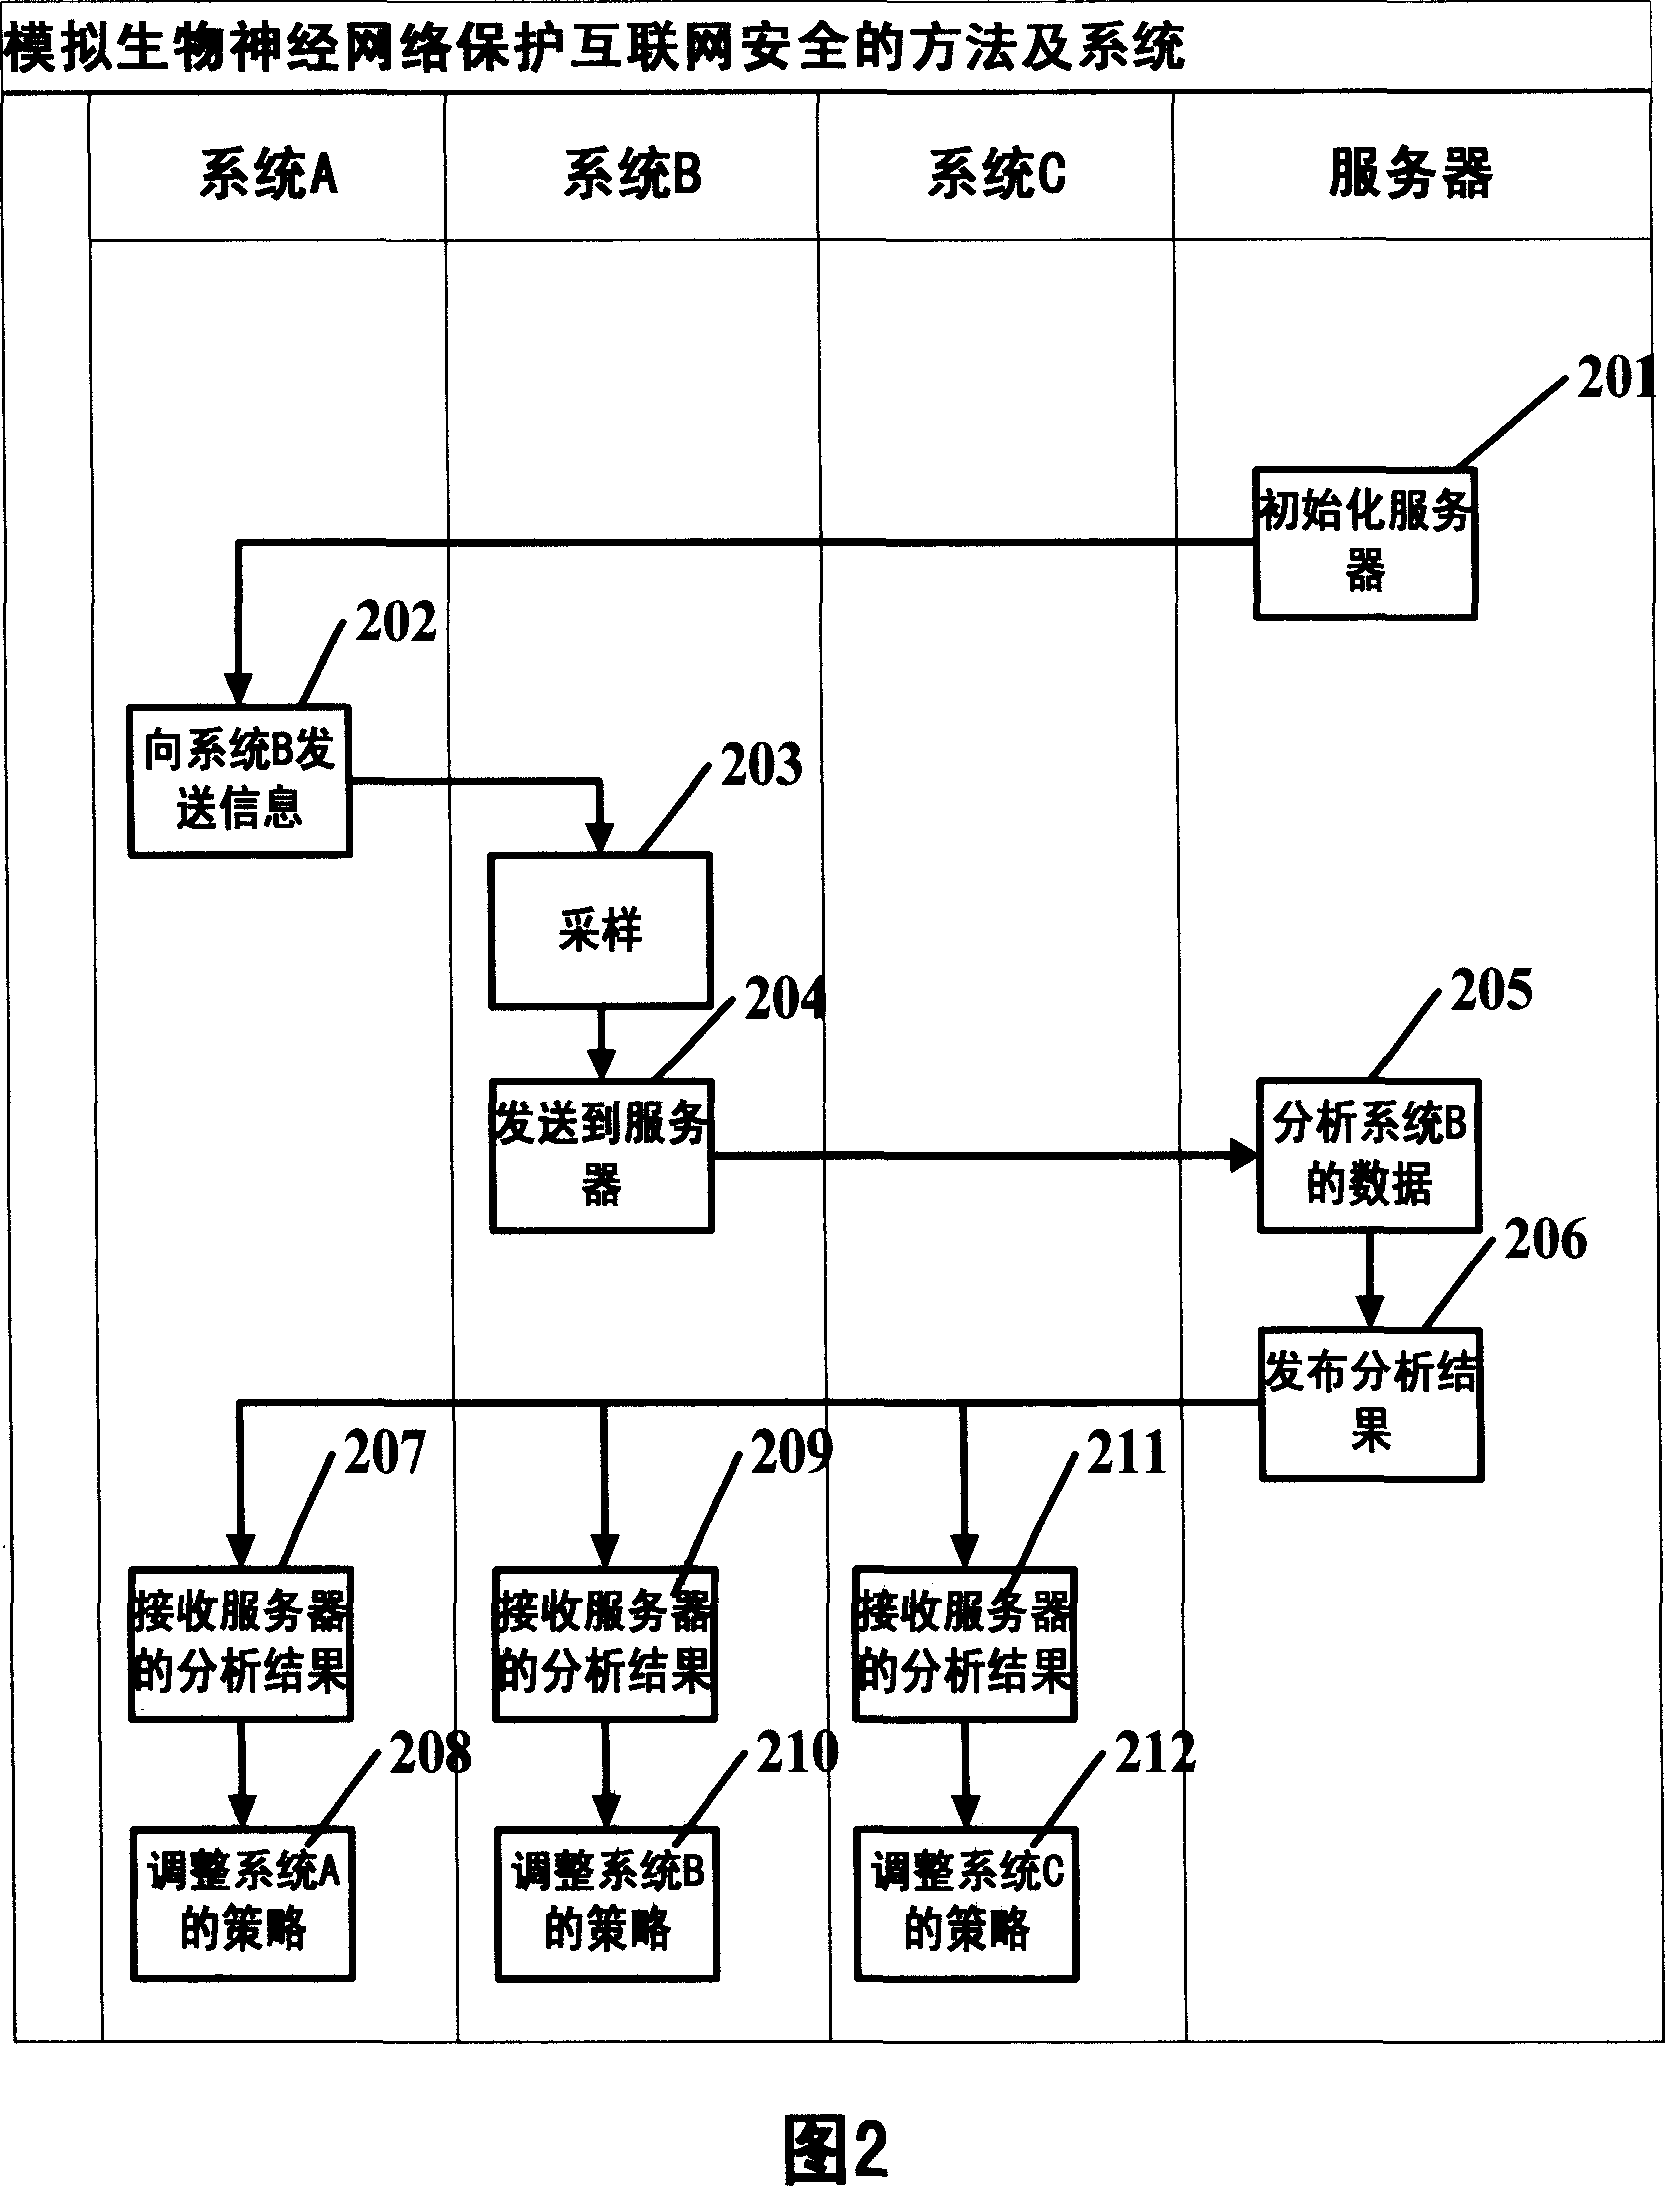 Method and system for protecting security of Internet by simulating biological neural network